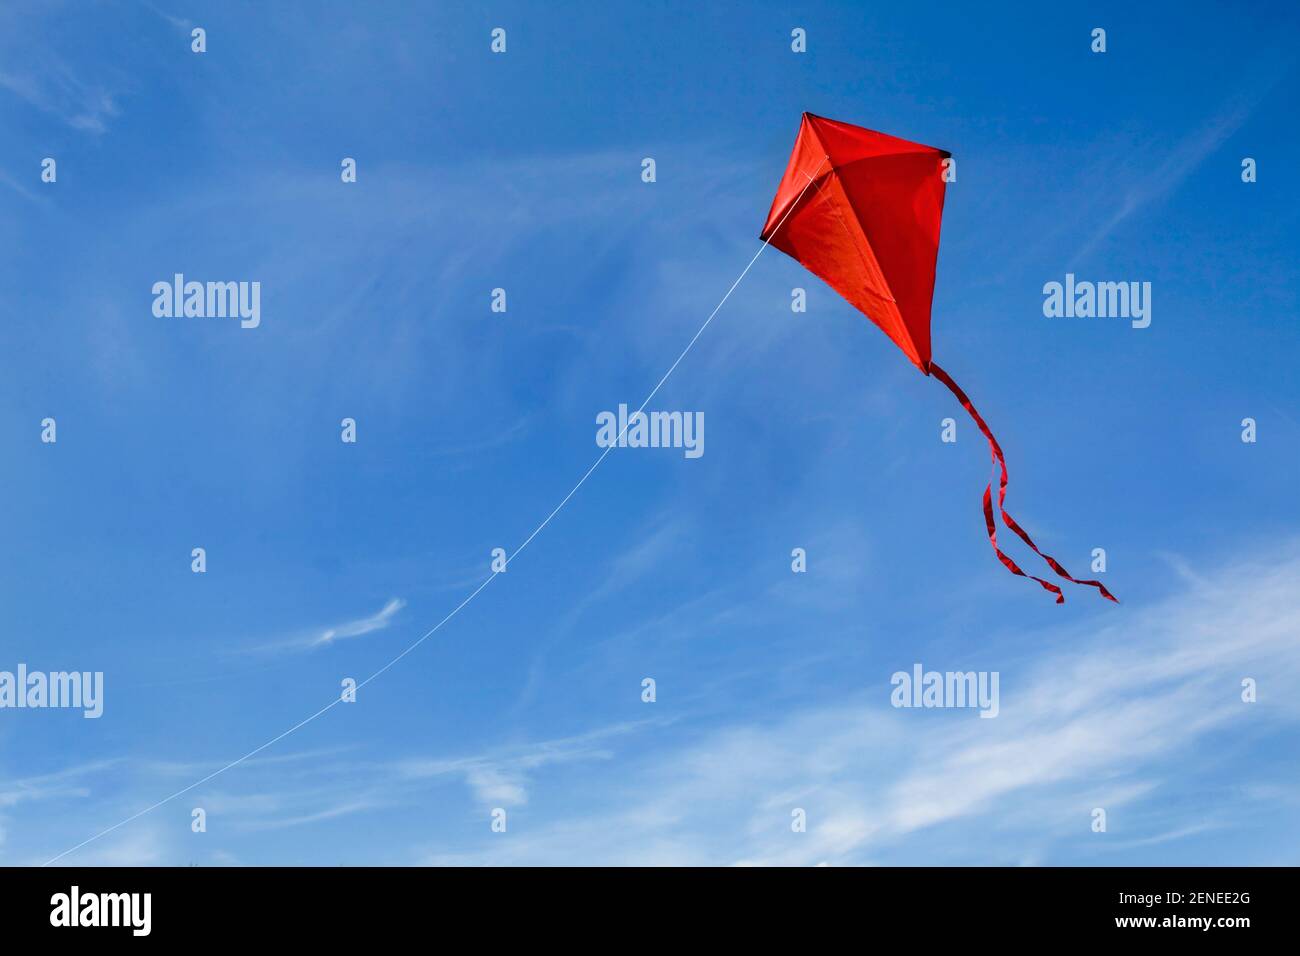 A red kite flying against a blue sky. Stock Photo